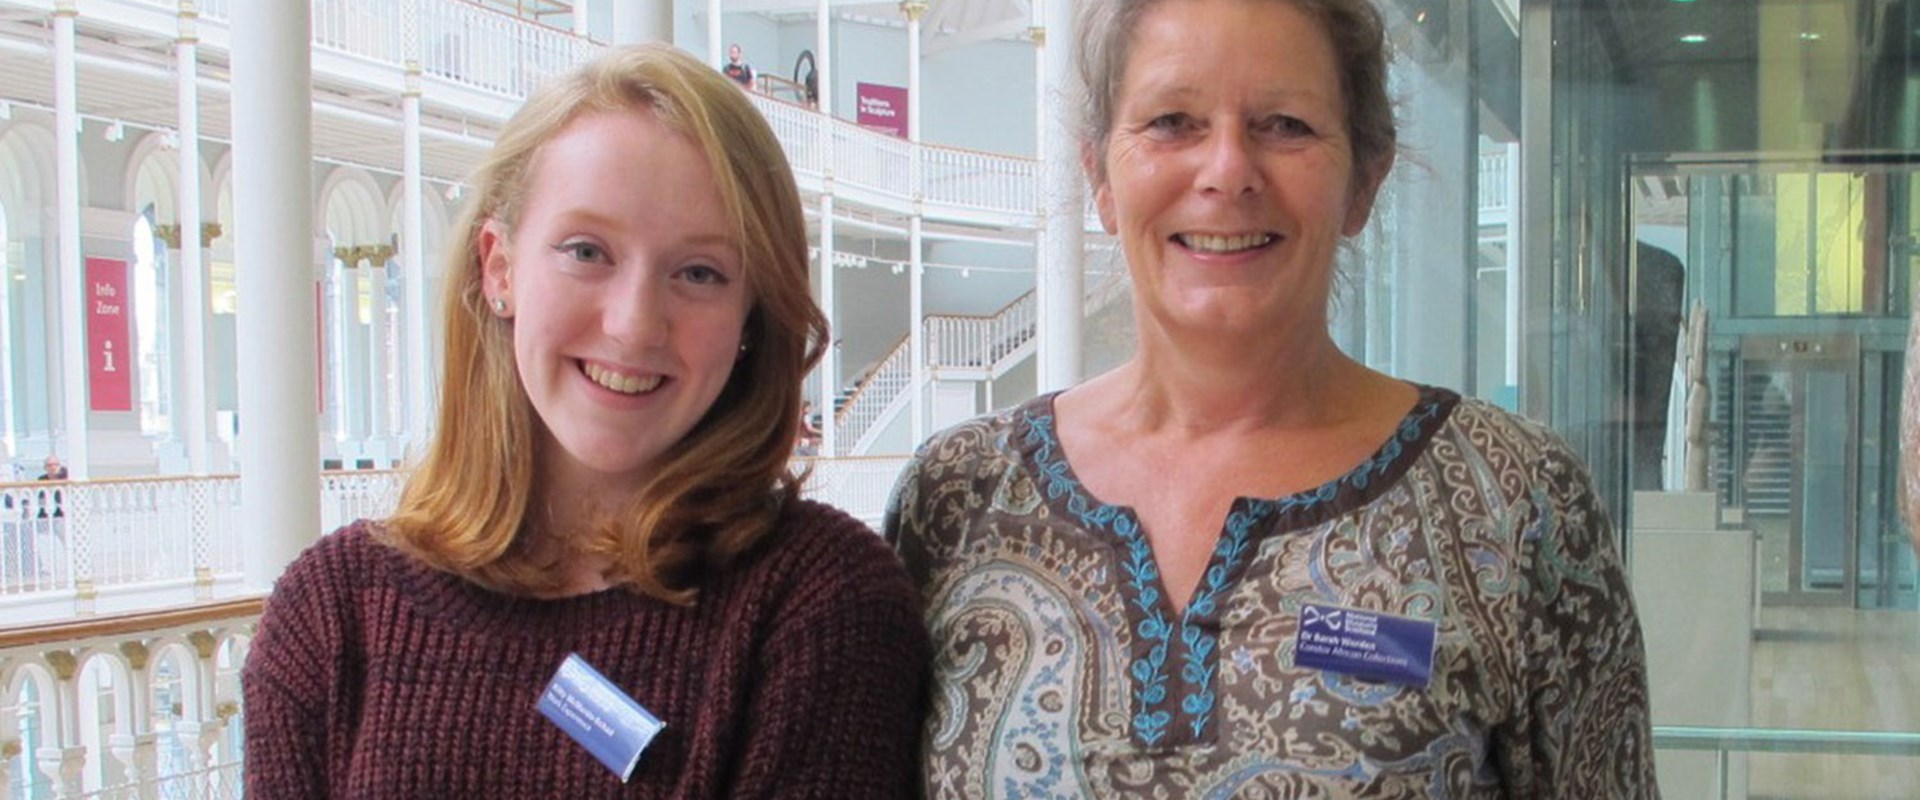 2014 Work experience student Kitty with curator Sarah Worden